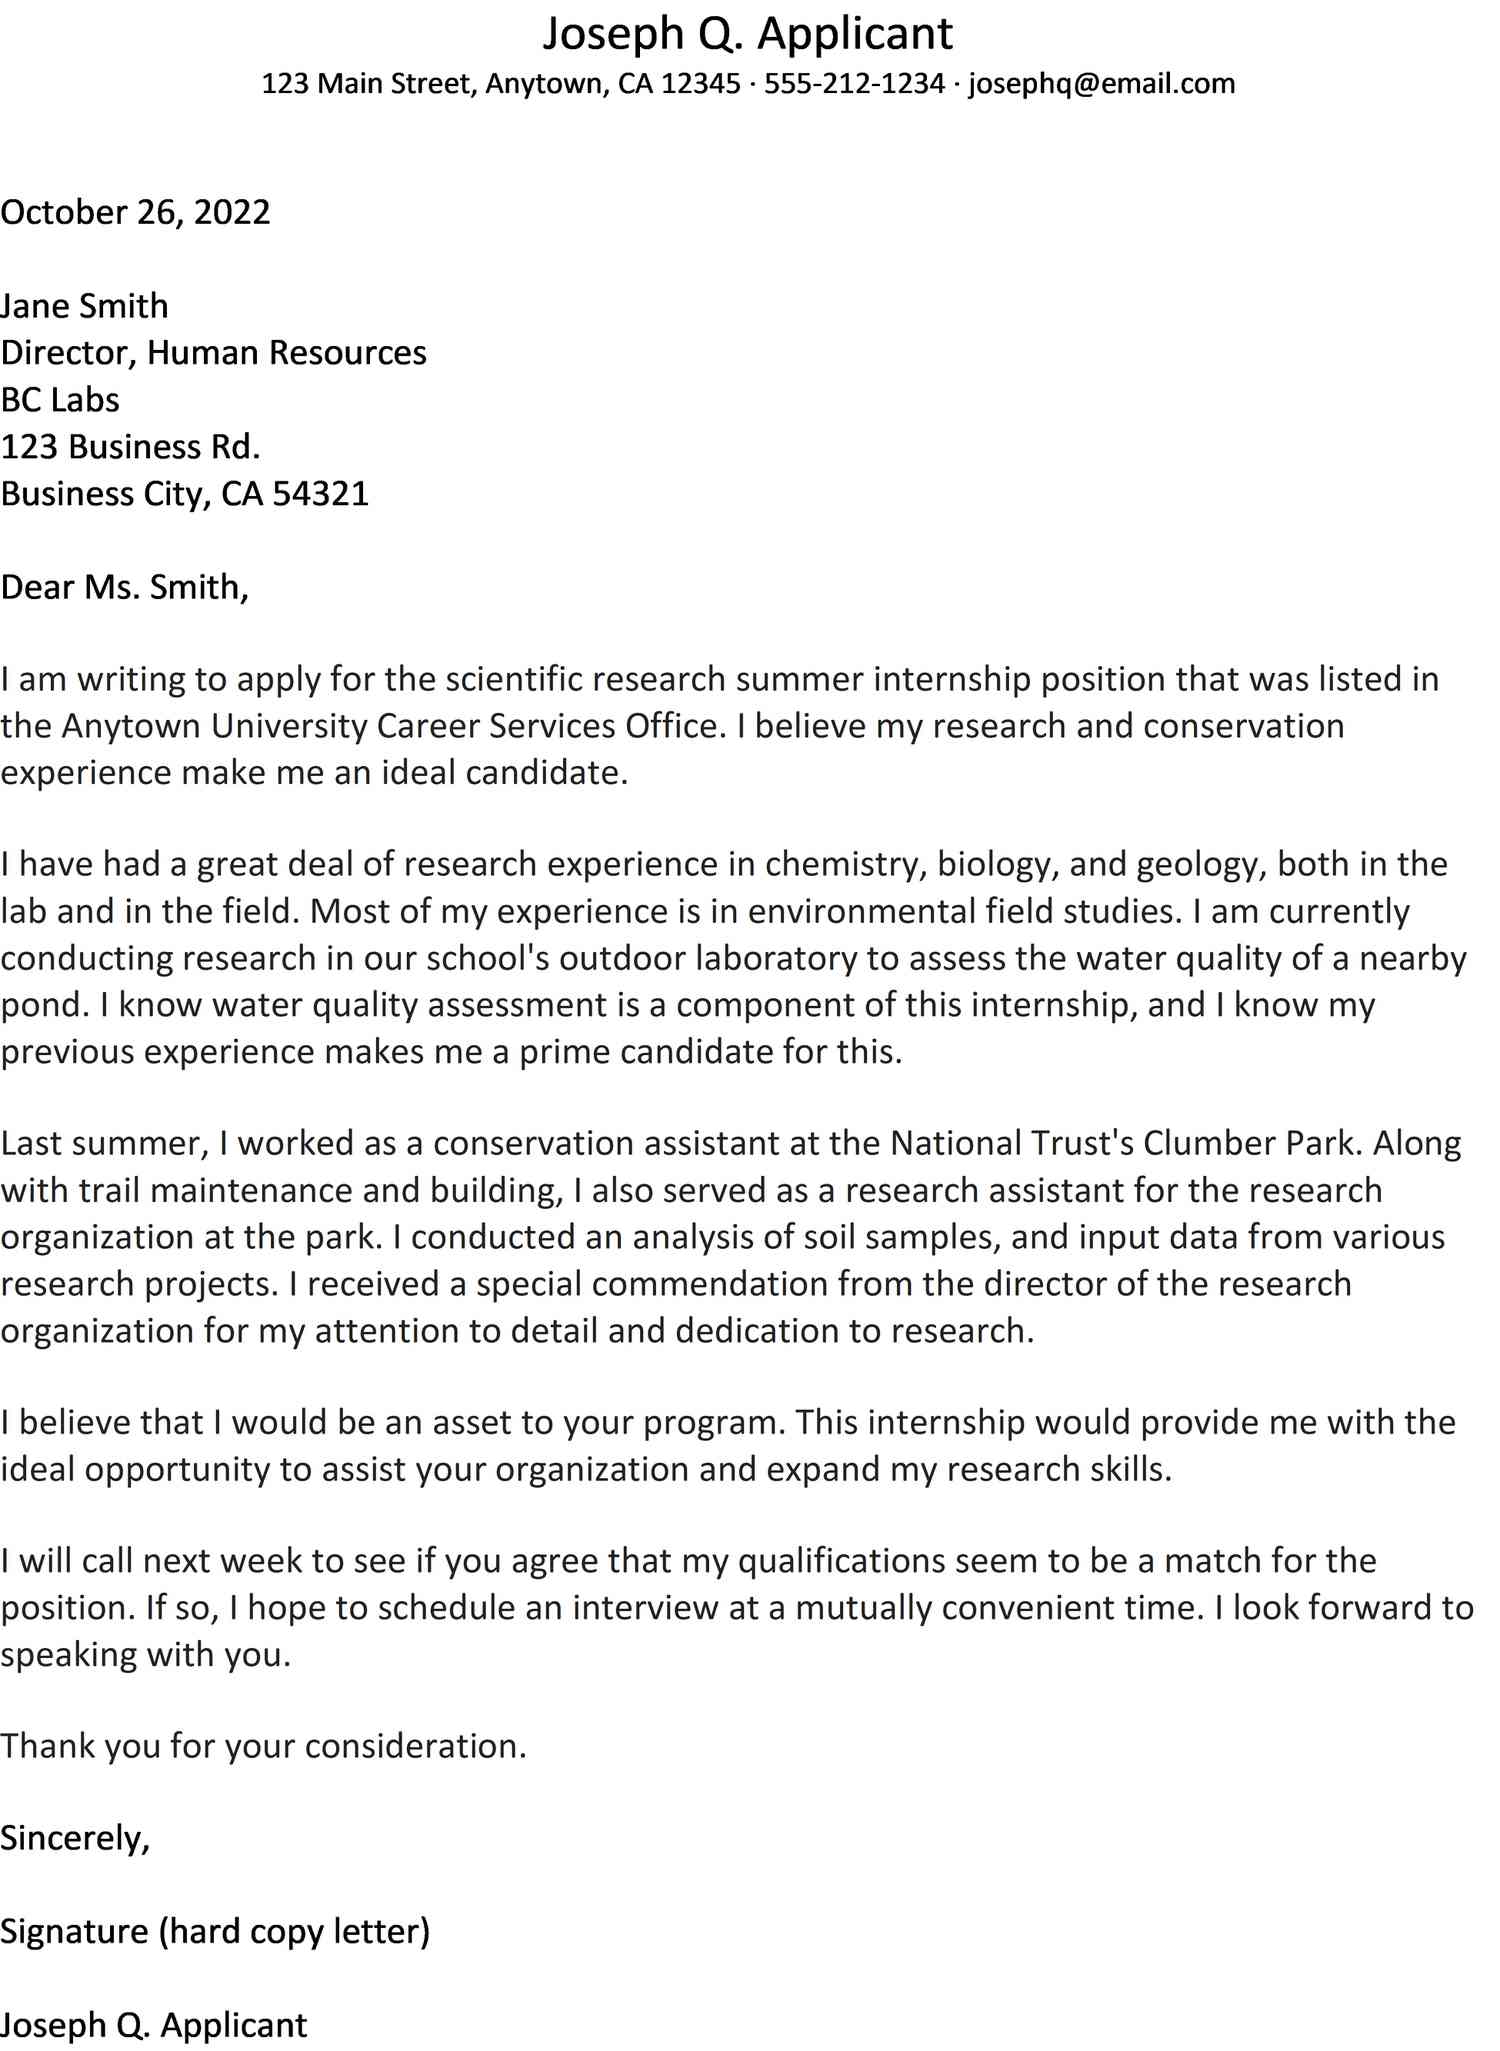 Internship Cover Letter Examples and Writing Tips / How to Write an ...